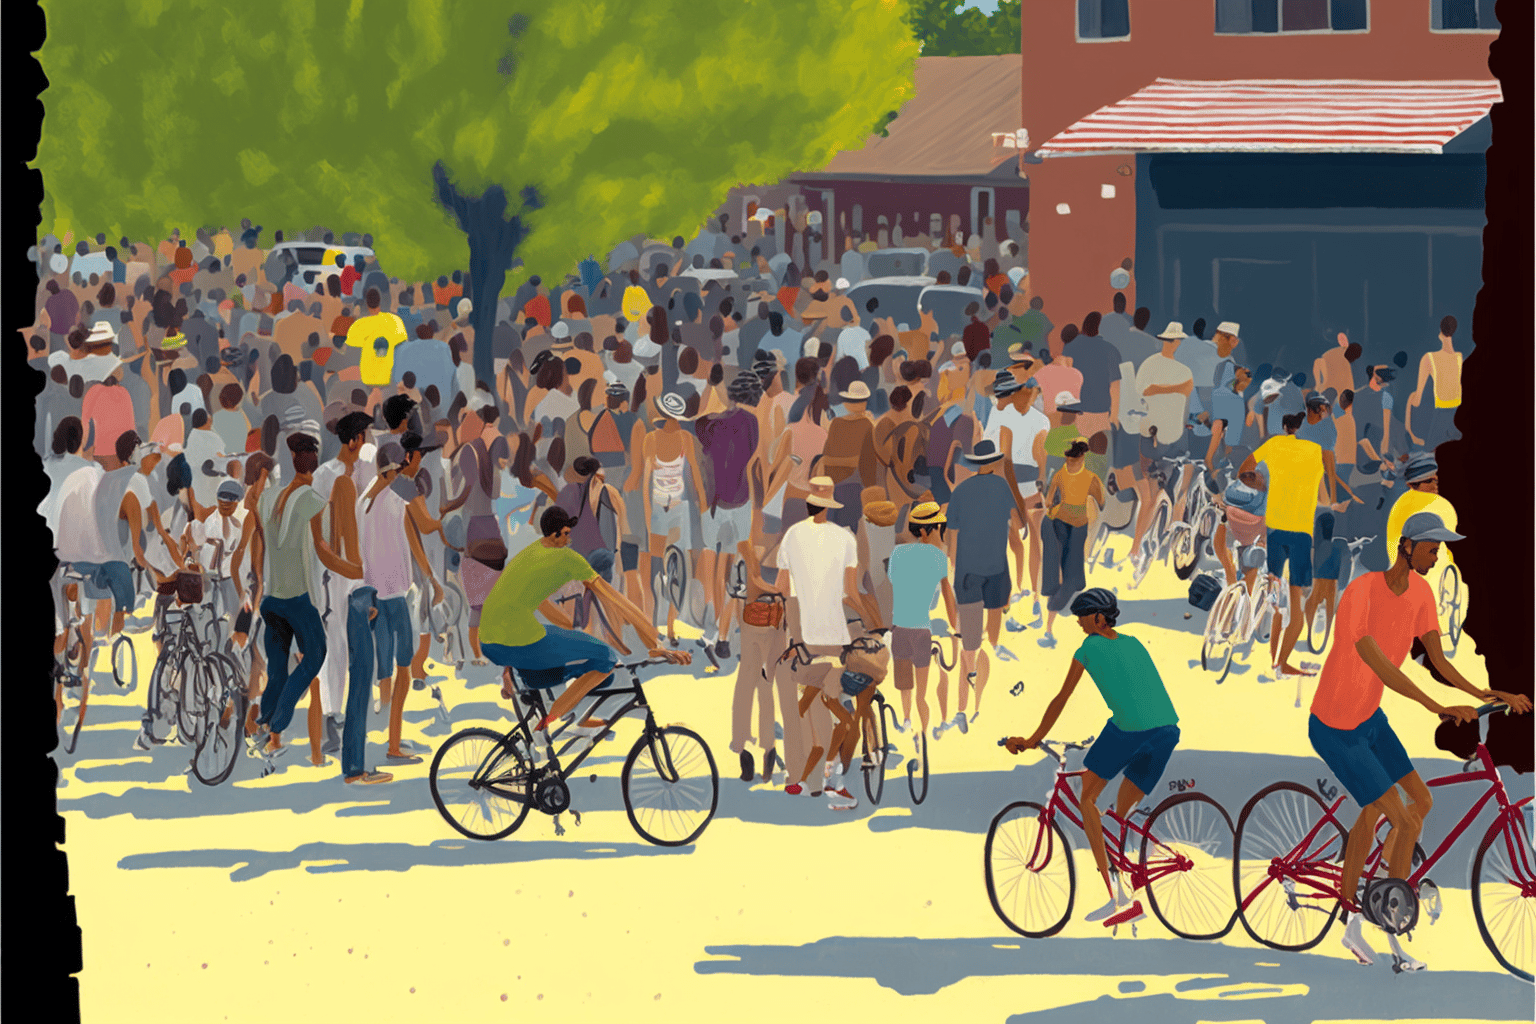 Image of a crowd of people biking on a summer day